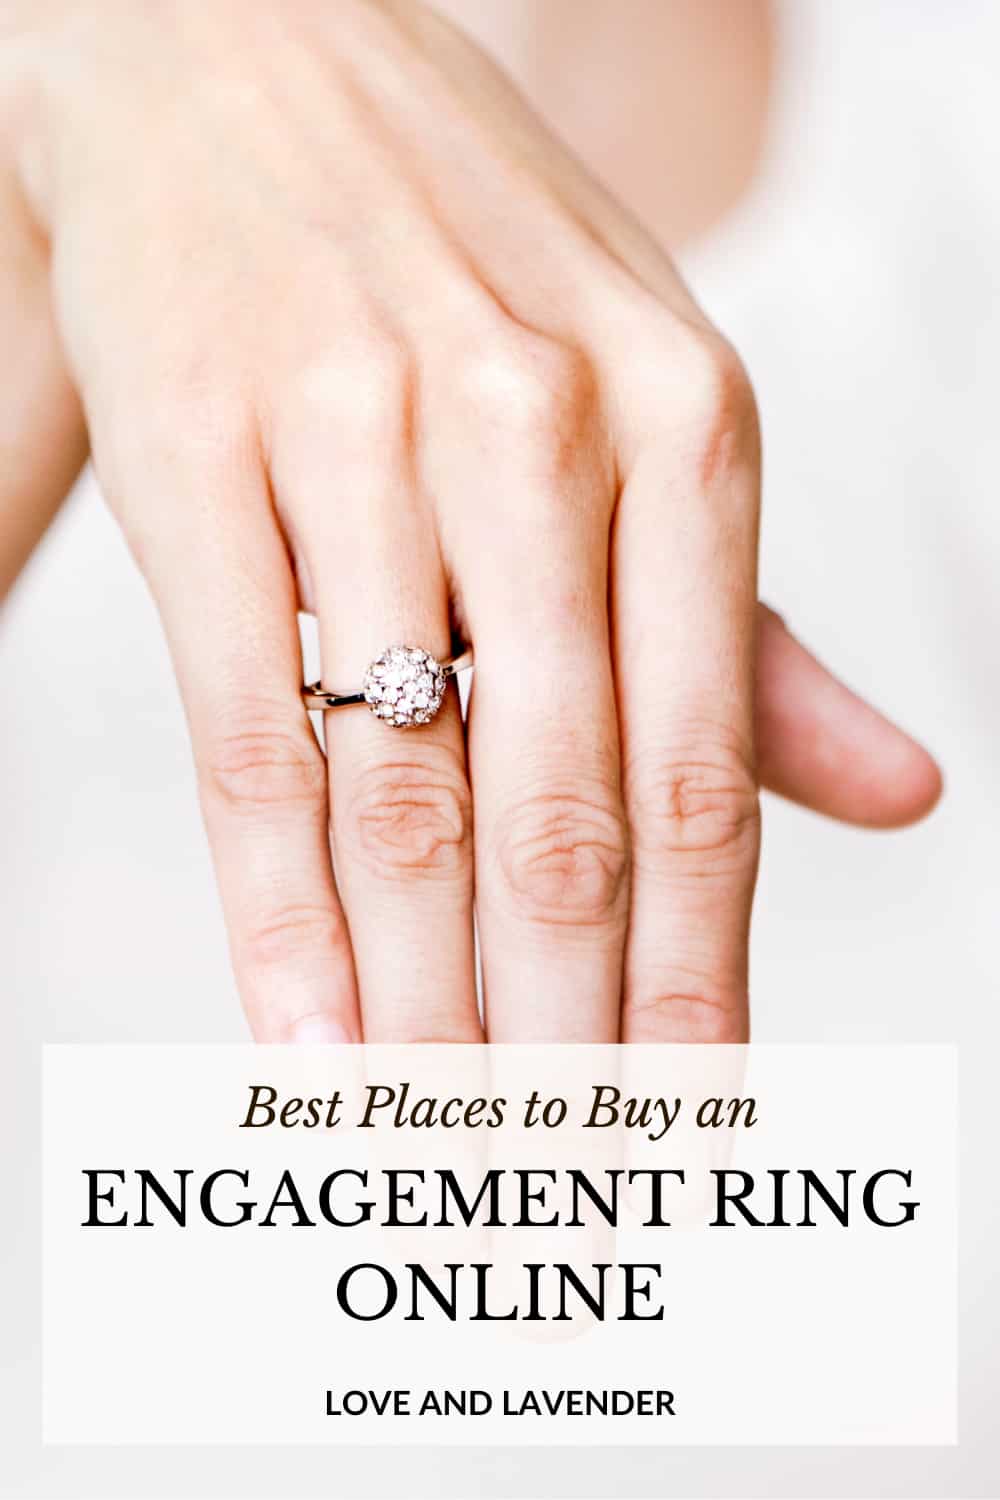 16 Best Places to Buy an Engagement Ring - Pinterest pin